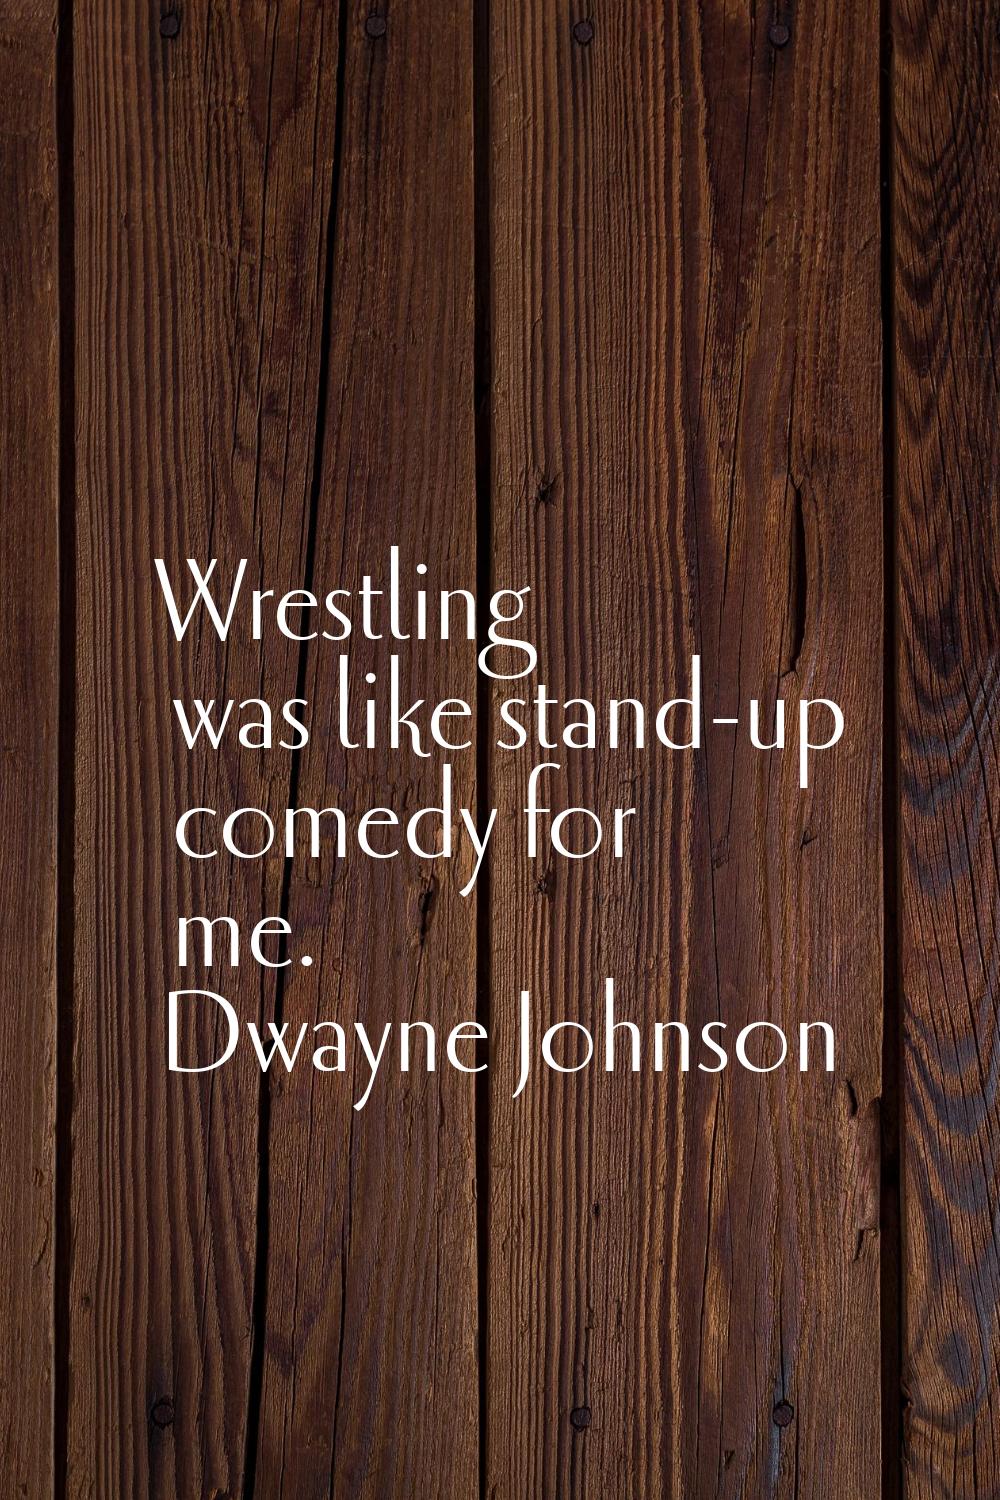 Wrestling was like stand-up comedy for me.